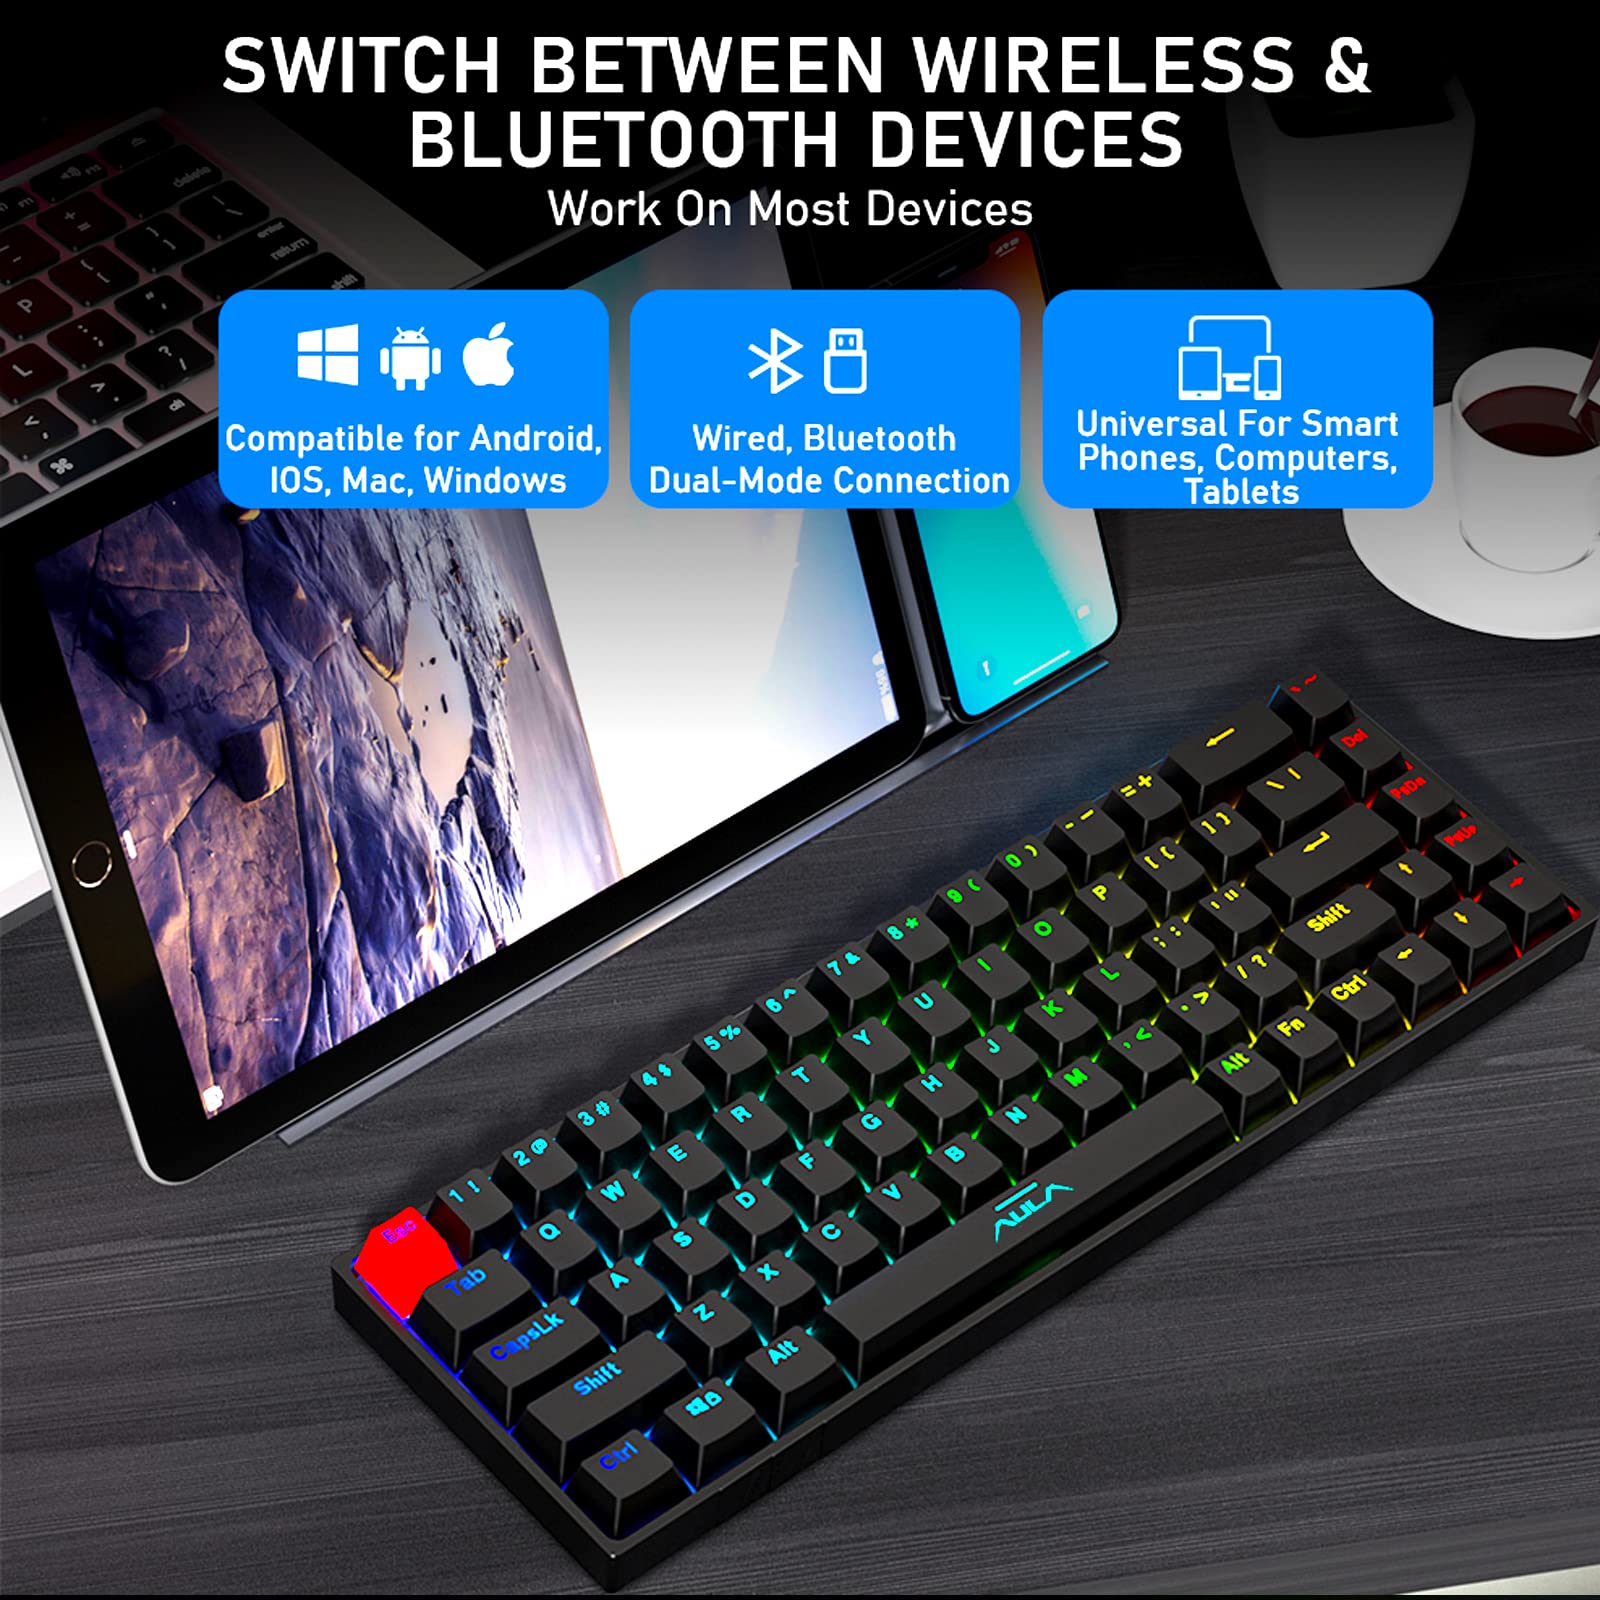 SOLAKAKA 65% Bluetooth Mechanical Keyboard, with RGB Backlit, Arrow Keys, Compact 68-Keys Hot Swappable, USB Wired Gaming Keyboards for Windows PC Mac Gamer, Blue Switch